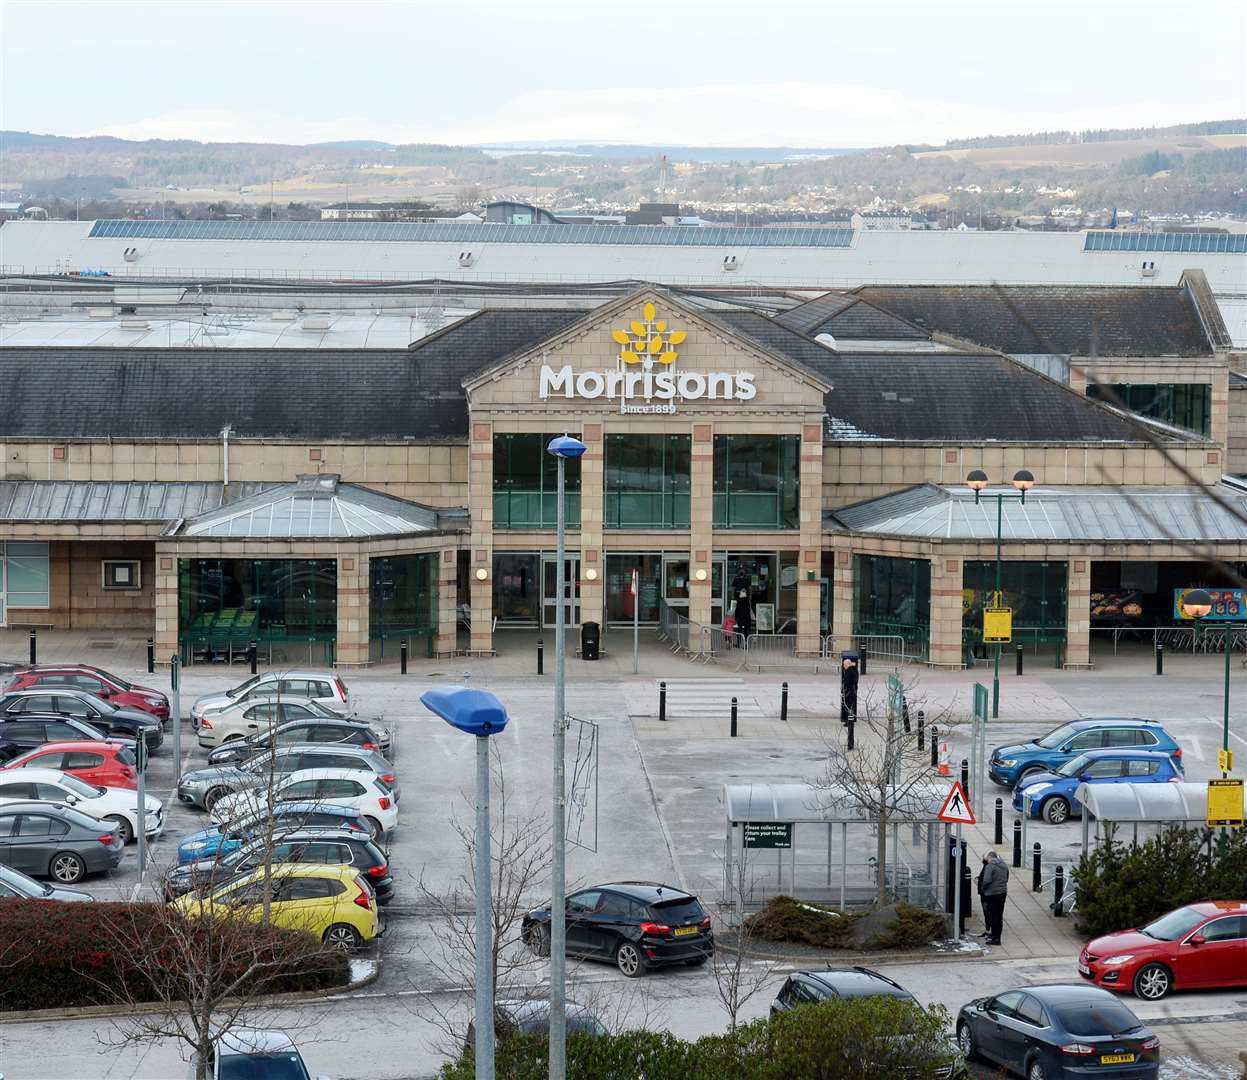 One of the incidents took place at the Morrisons supermarket in Inverness's Millburn Road.